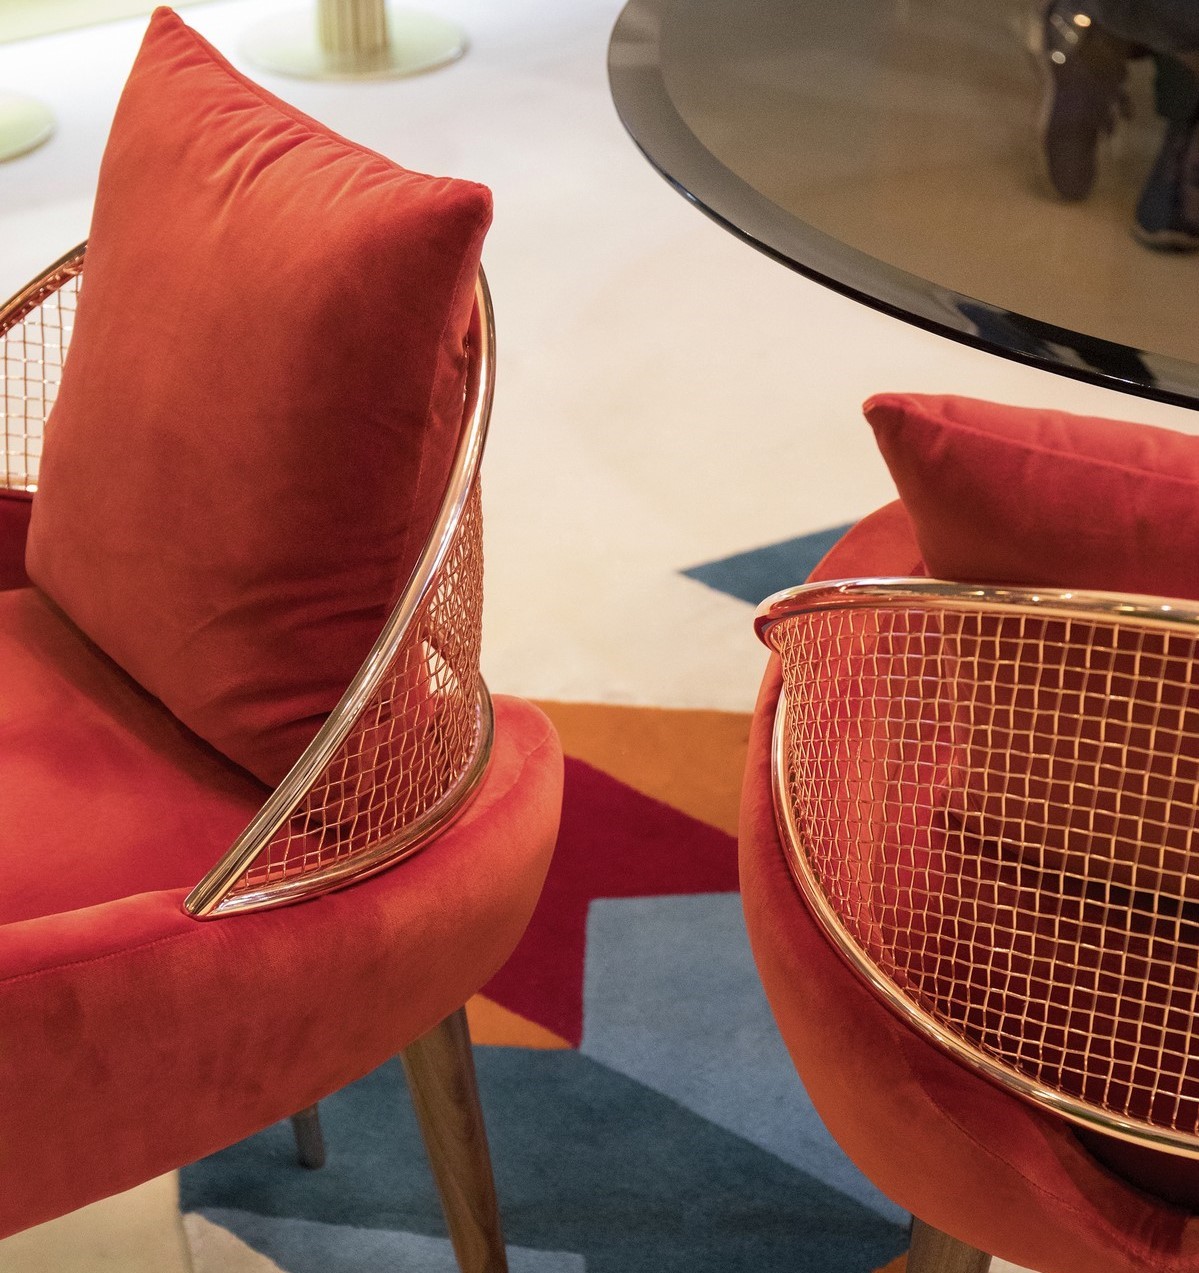 Details Present At Isaloni 2018